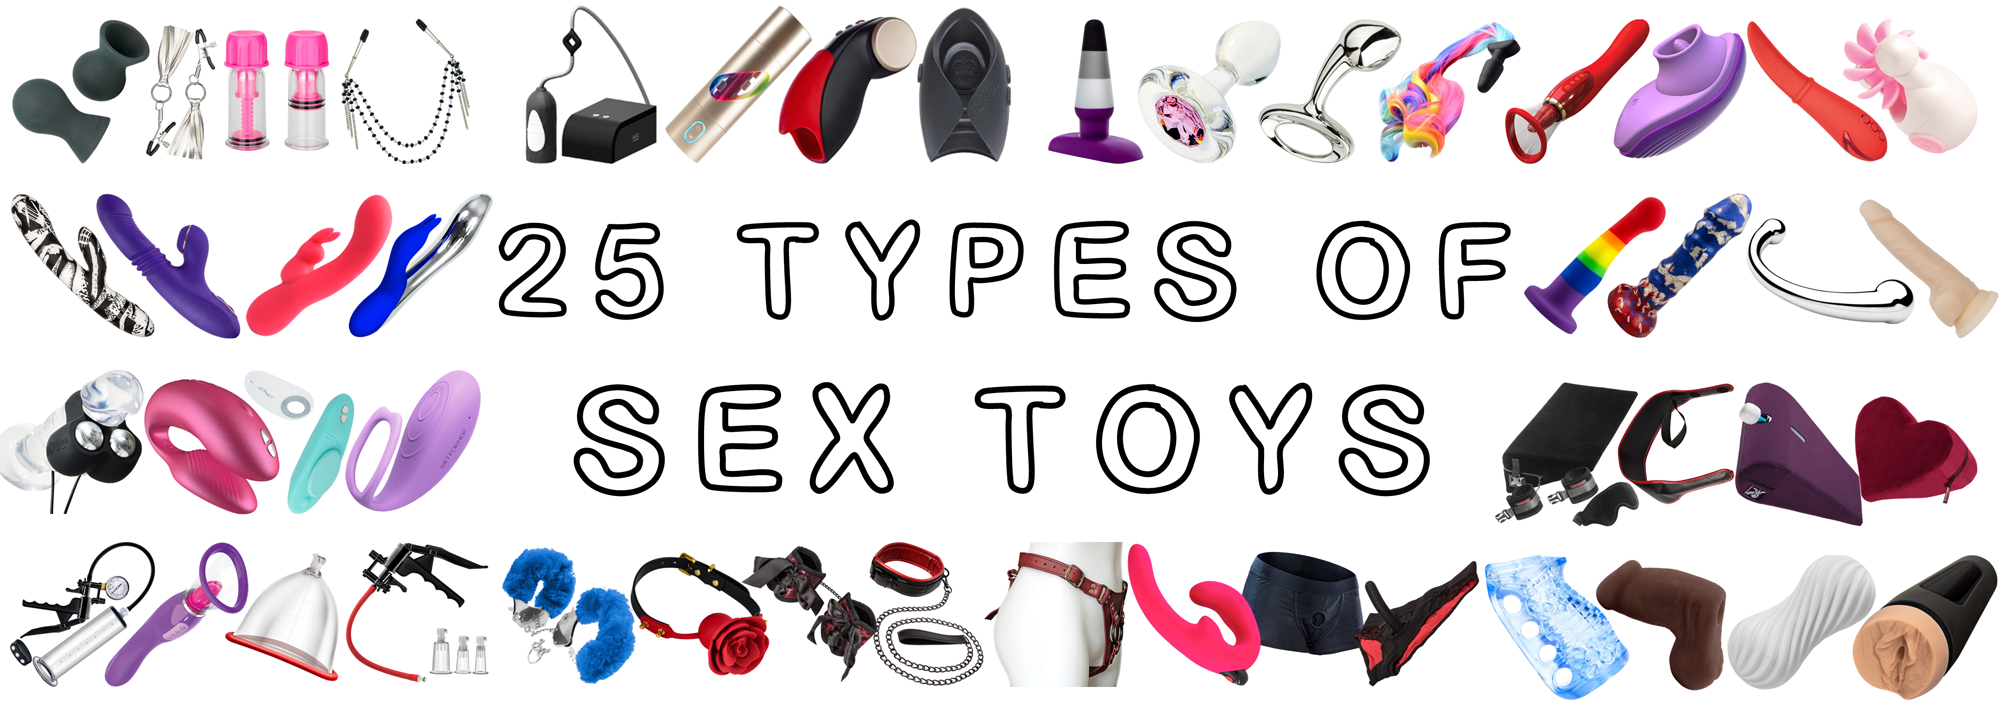 Sex Sex Sex Toys - 25 Types of Sex Toys: A Guide to Help You Know What's Out There - Betty  Butch